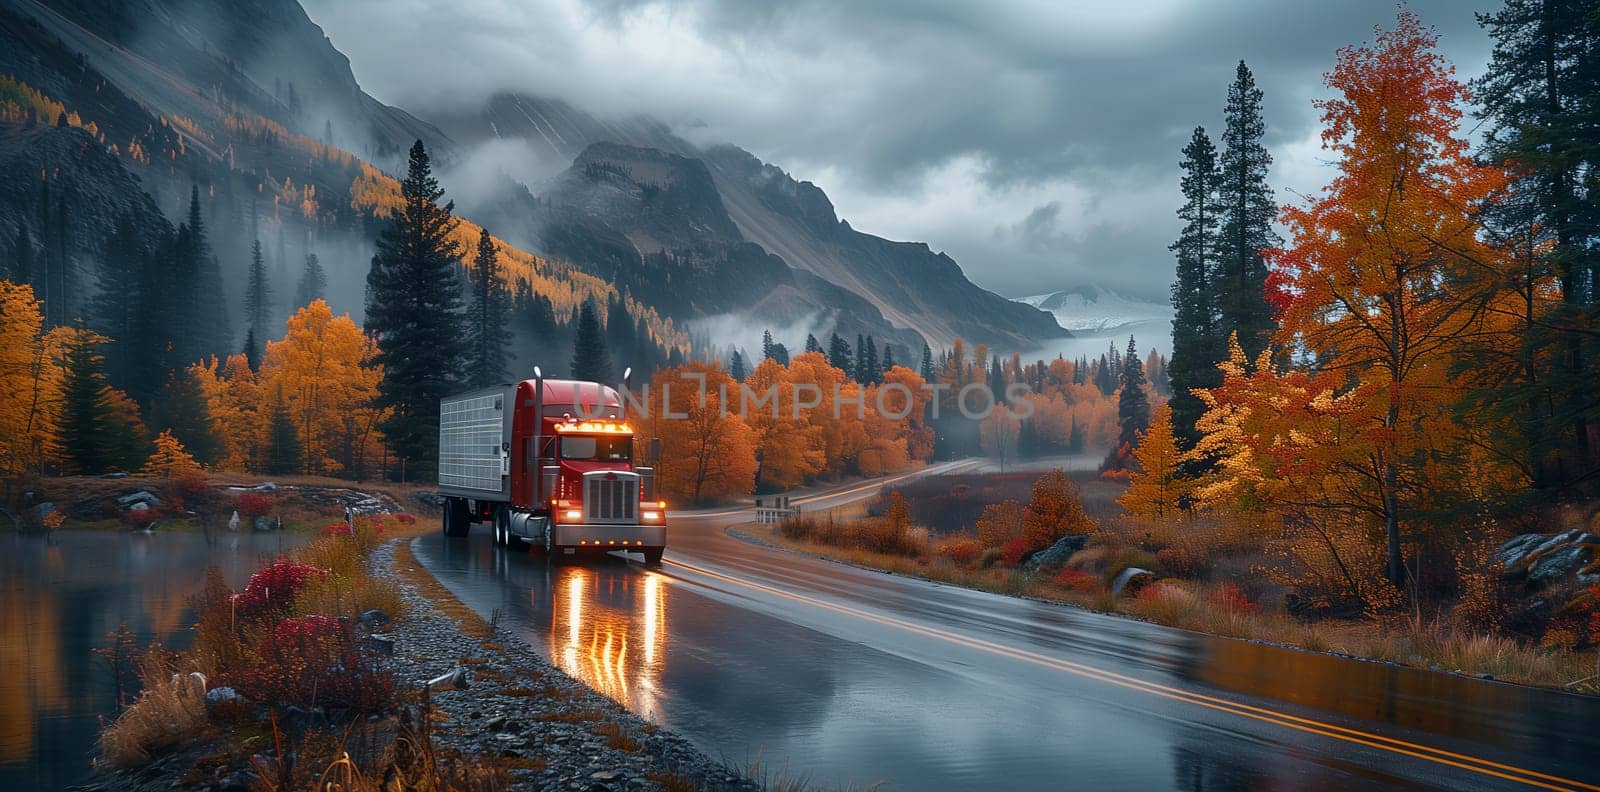 A semi truck is descending a mountain road next to a picturesque river, surrounded by natural landscape, trees, and a cloudy sky